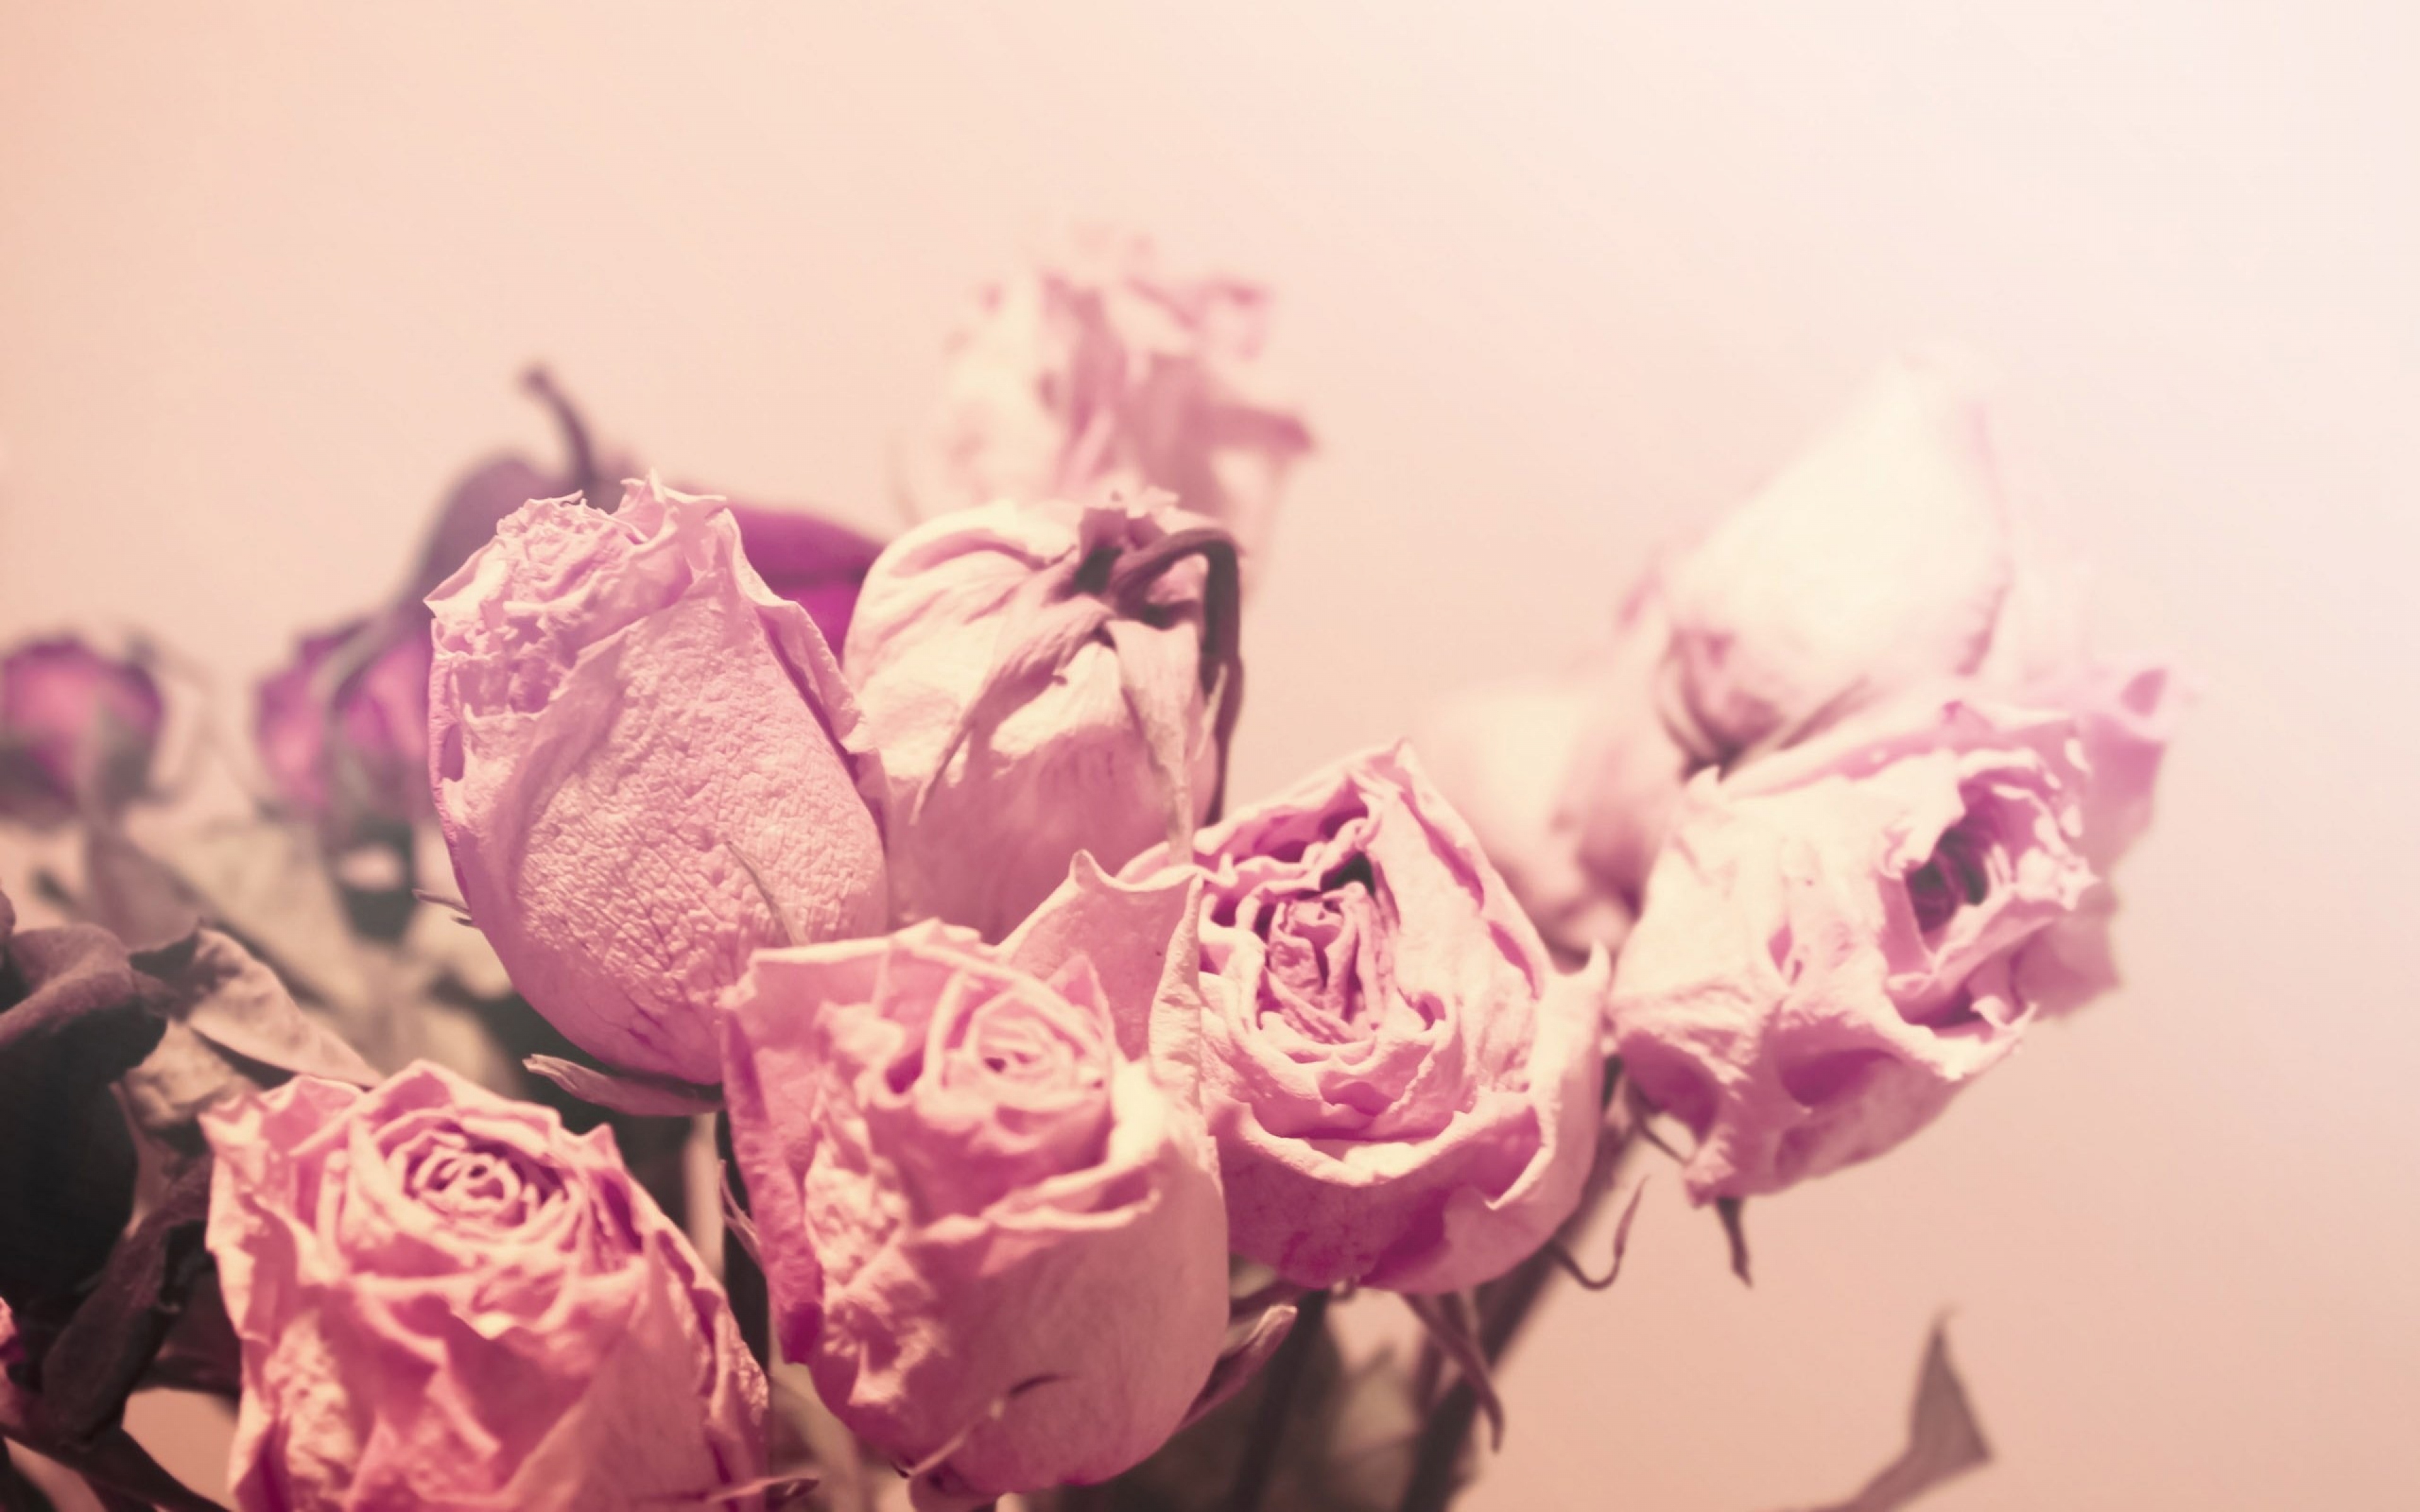 Download Wallpaper 3840x2400 Roses, Flowers, Sweet, Dried, Buds ...